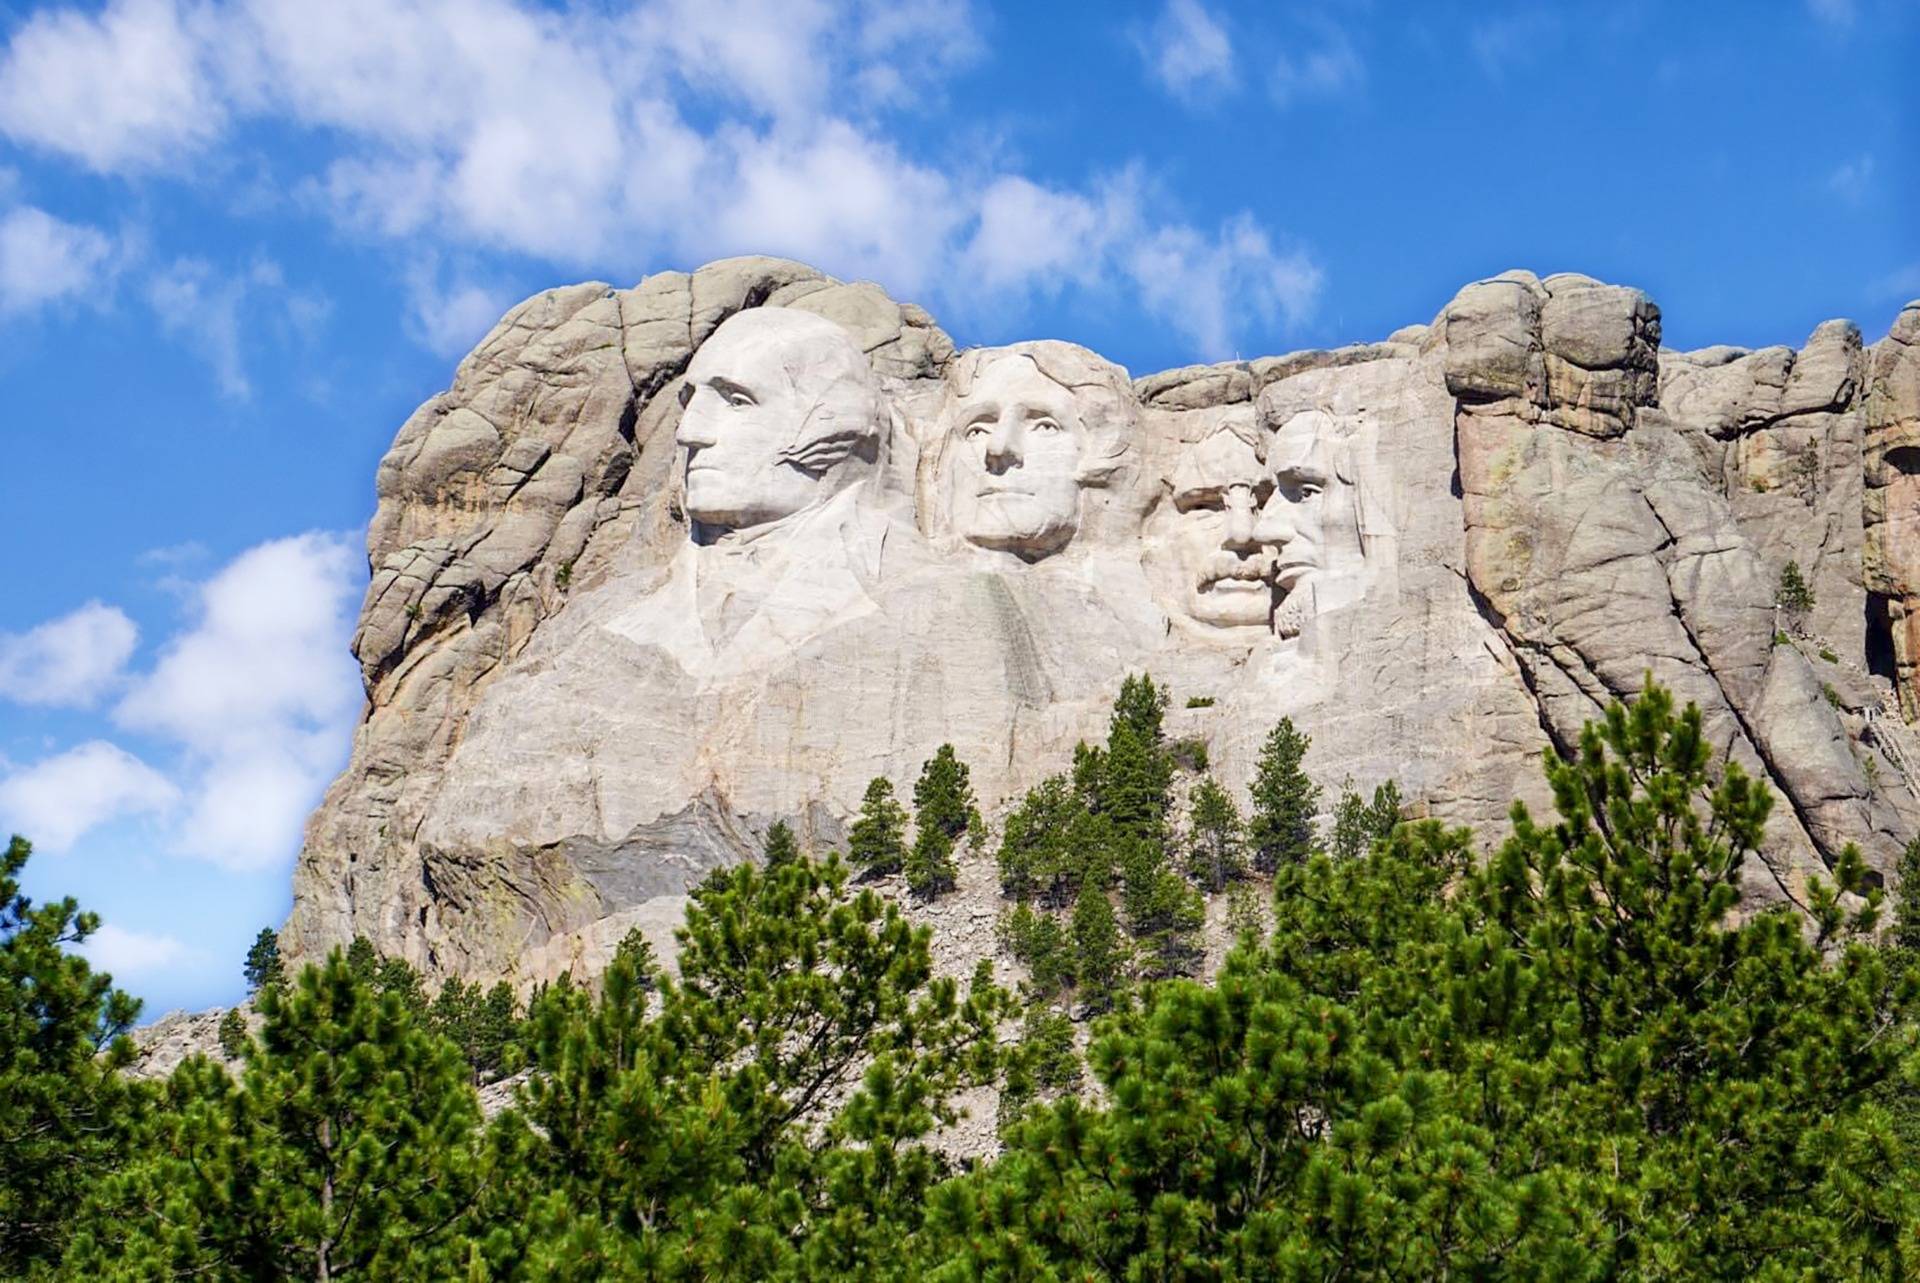 Bucket List Visits - Mt. Rushmore and Yellowstone Park